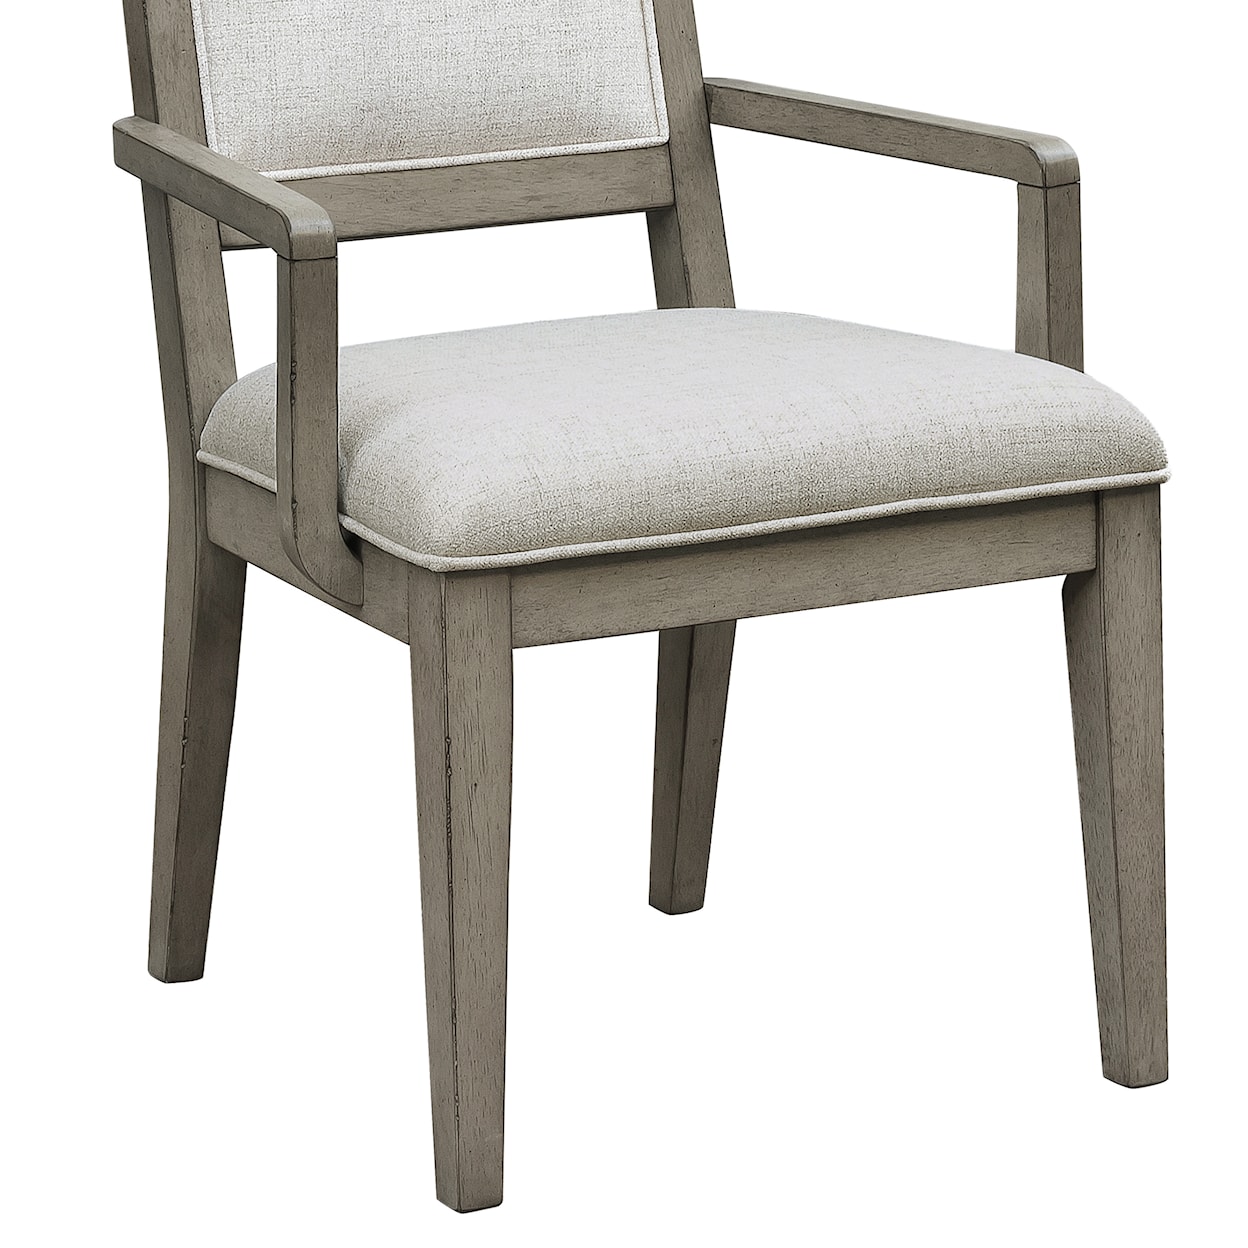 Samuel Lawrence Essex by Drew and Jonathan Home Essex Dining Arm Chair